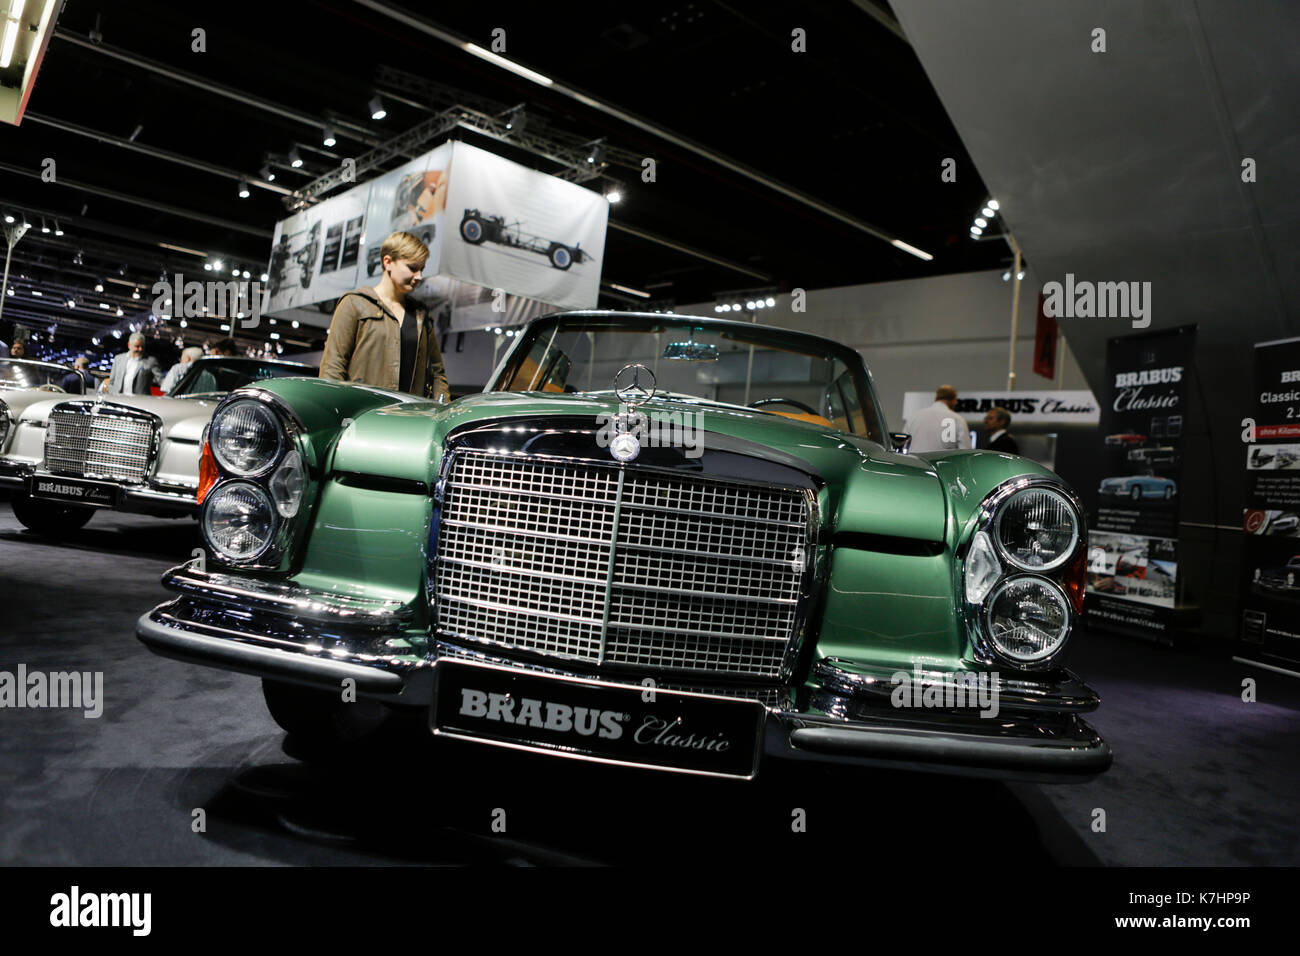 Frankfurt, Germany. 15th September 2017. The German car tuner Brabus Classic presents the Mercedes-Benz 280 SE at the 67. IAA. The 67. Internationale Automobil-Ausstellung (IAA in Frankfurt is with over 1000 exhibitors one of the largest Motor Shows in the world. The show will open for the general public from the 16th until the 24th September. Stock Photo